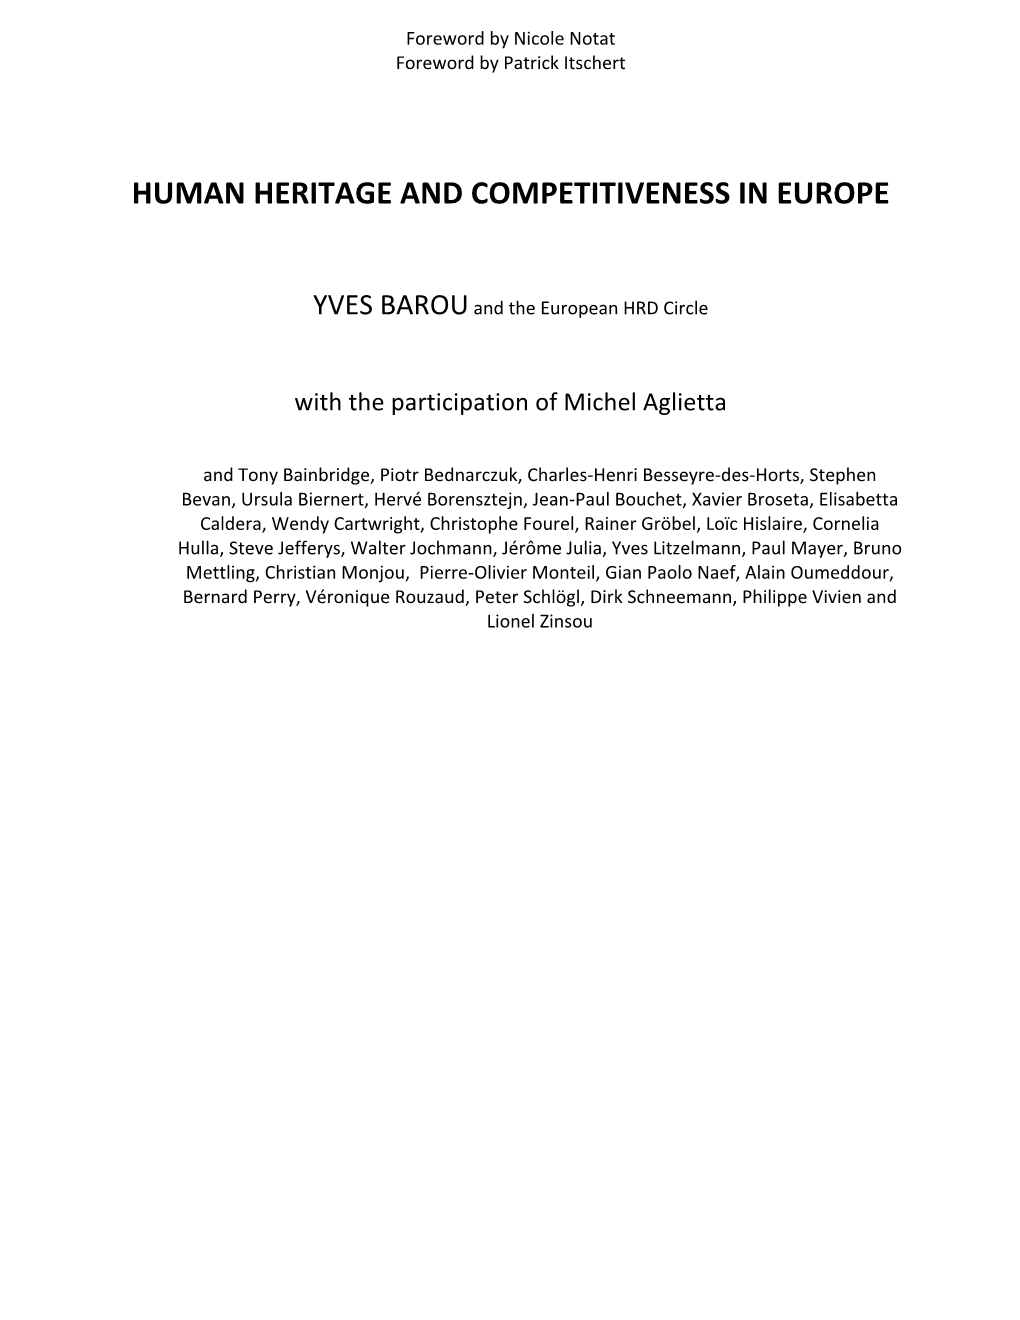 Human Heritage and Competitiveness in Europe